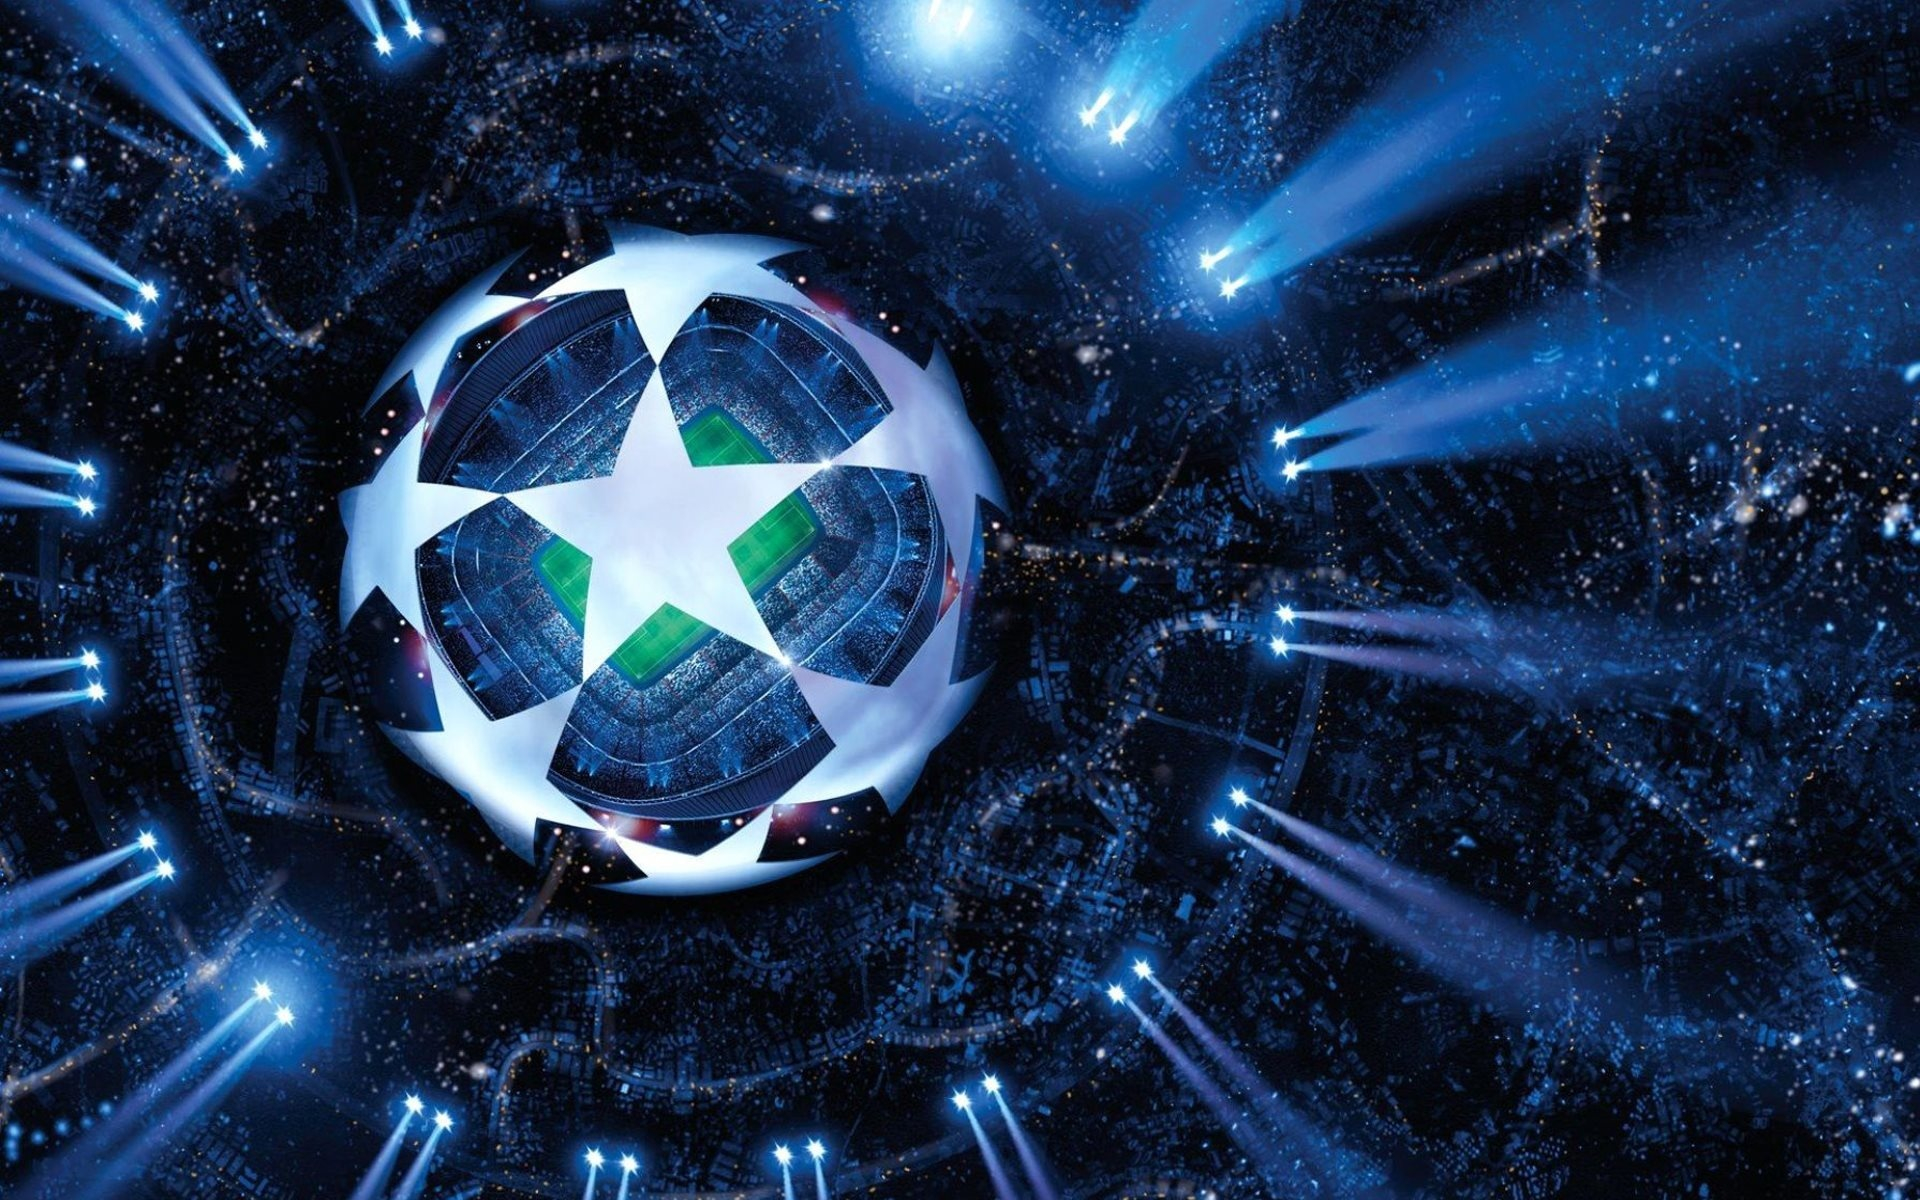 UEFA Champions League Wallpapers and Backgrounds 4K, HD, Dual Screen